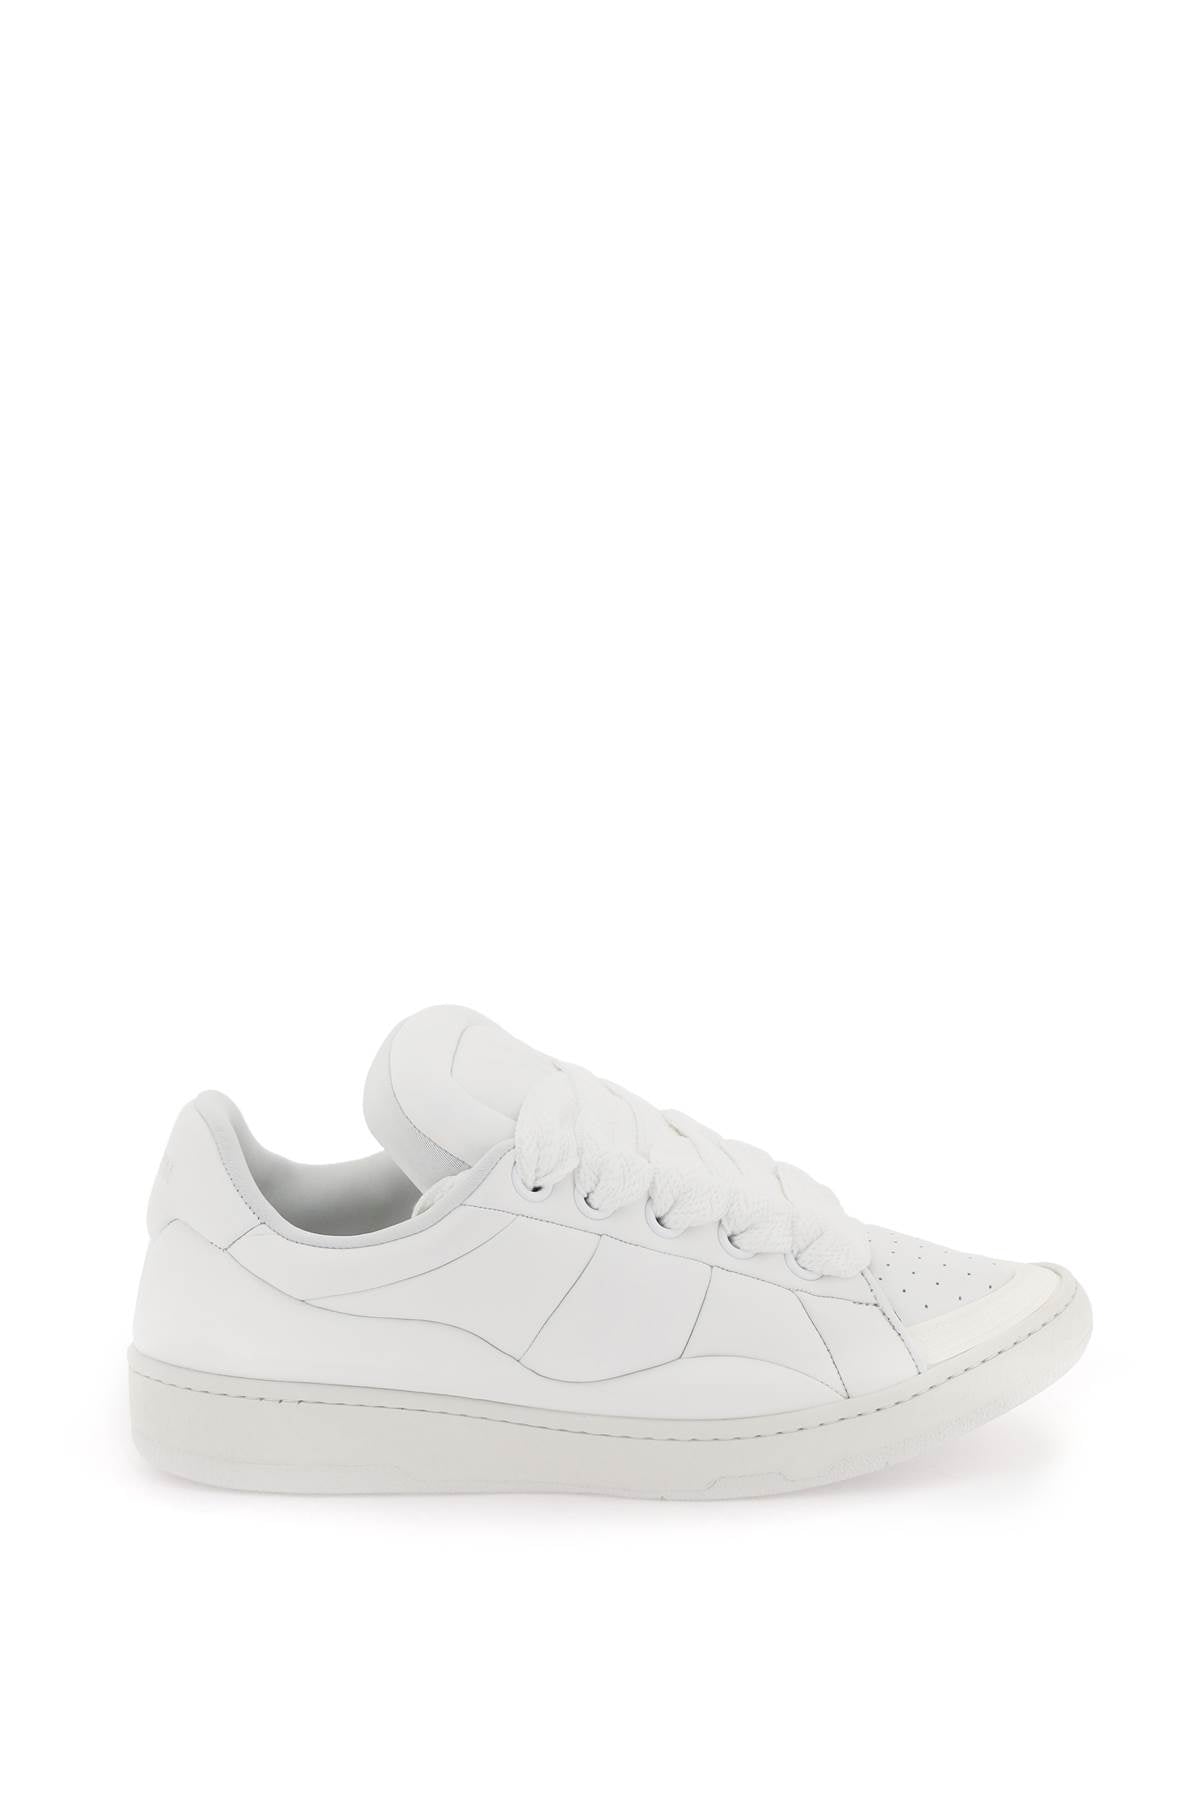 LANVIN Men's White Curb Sneakers for FW24